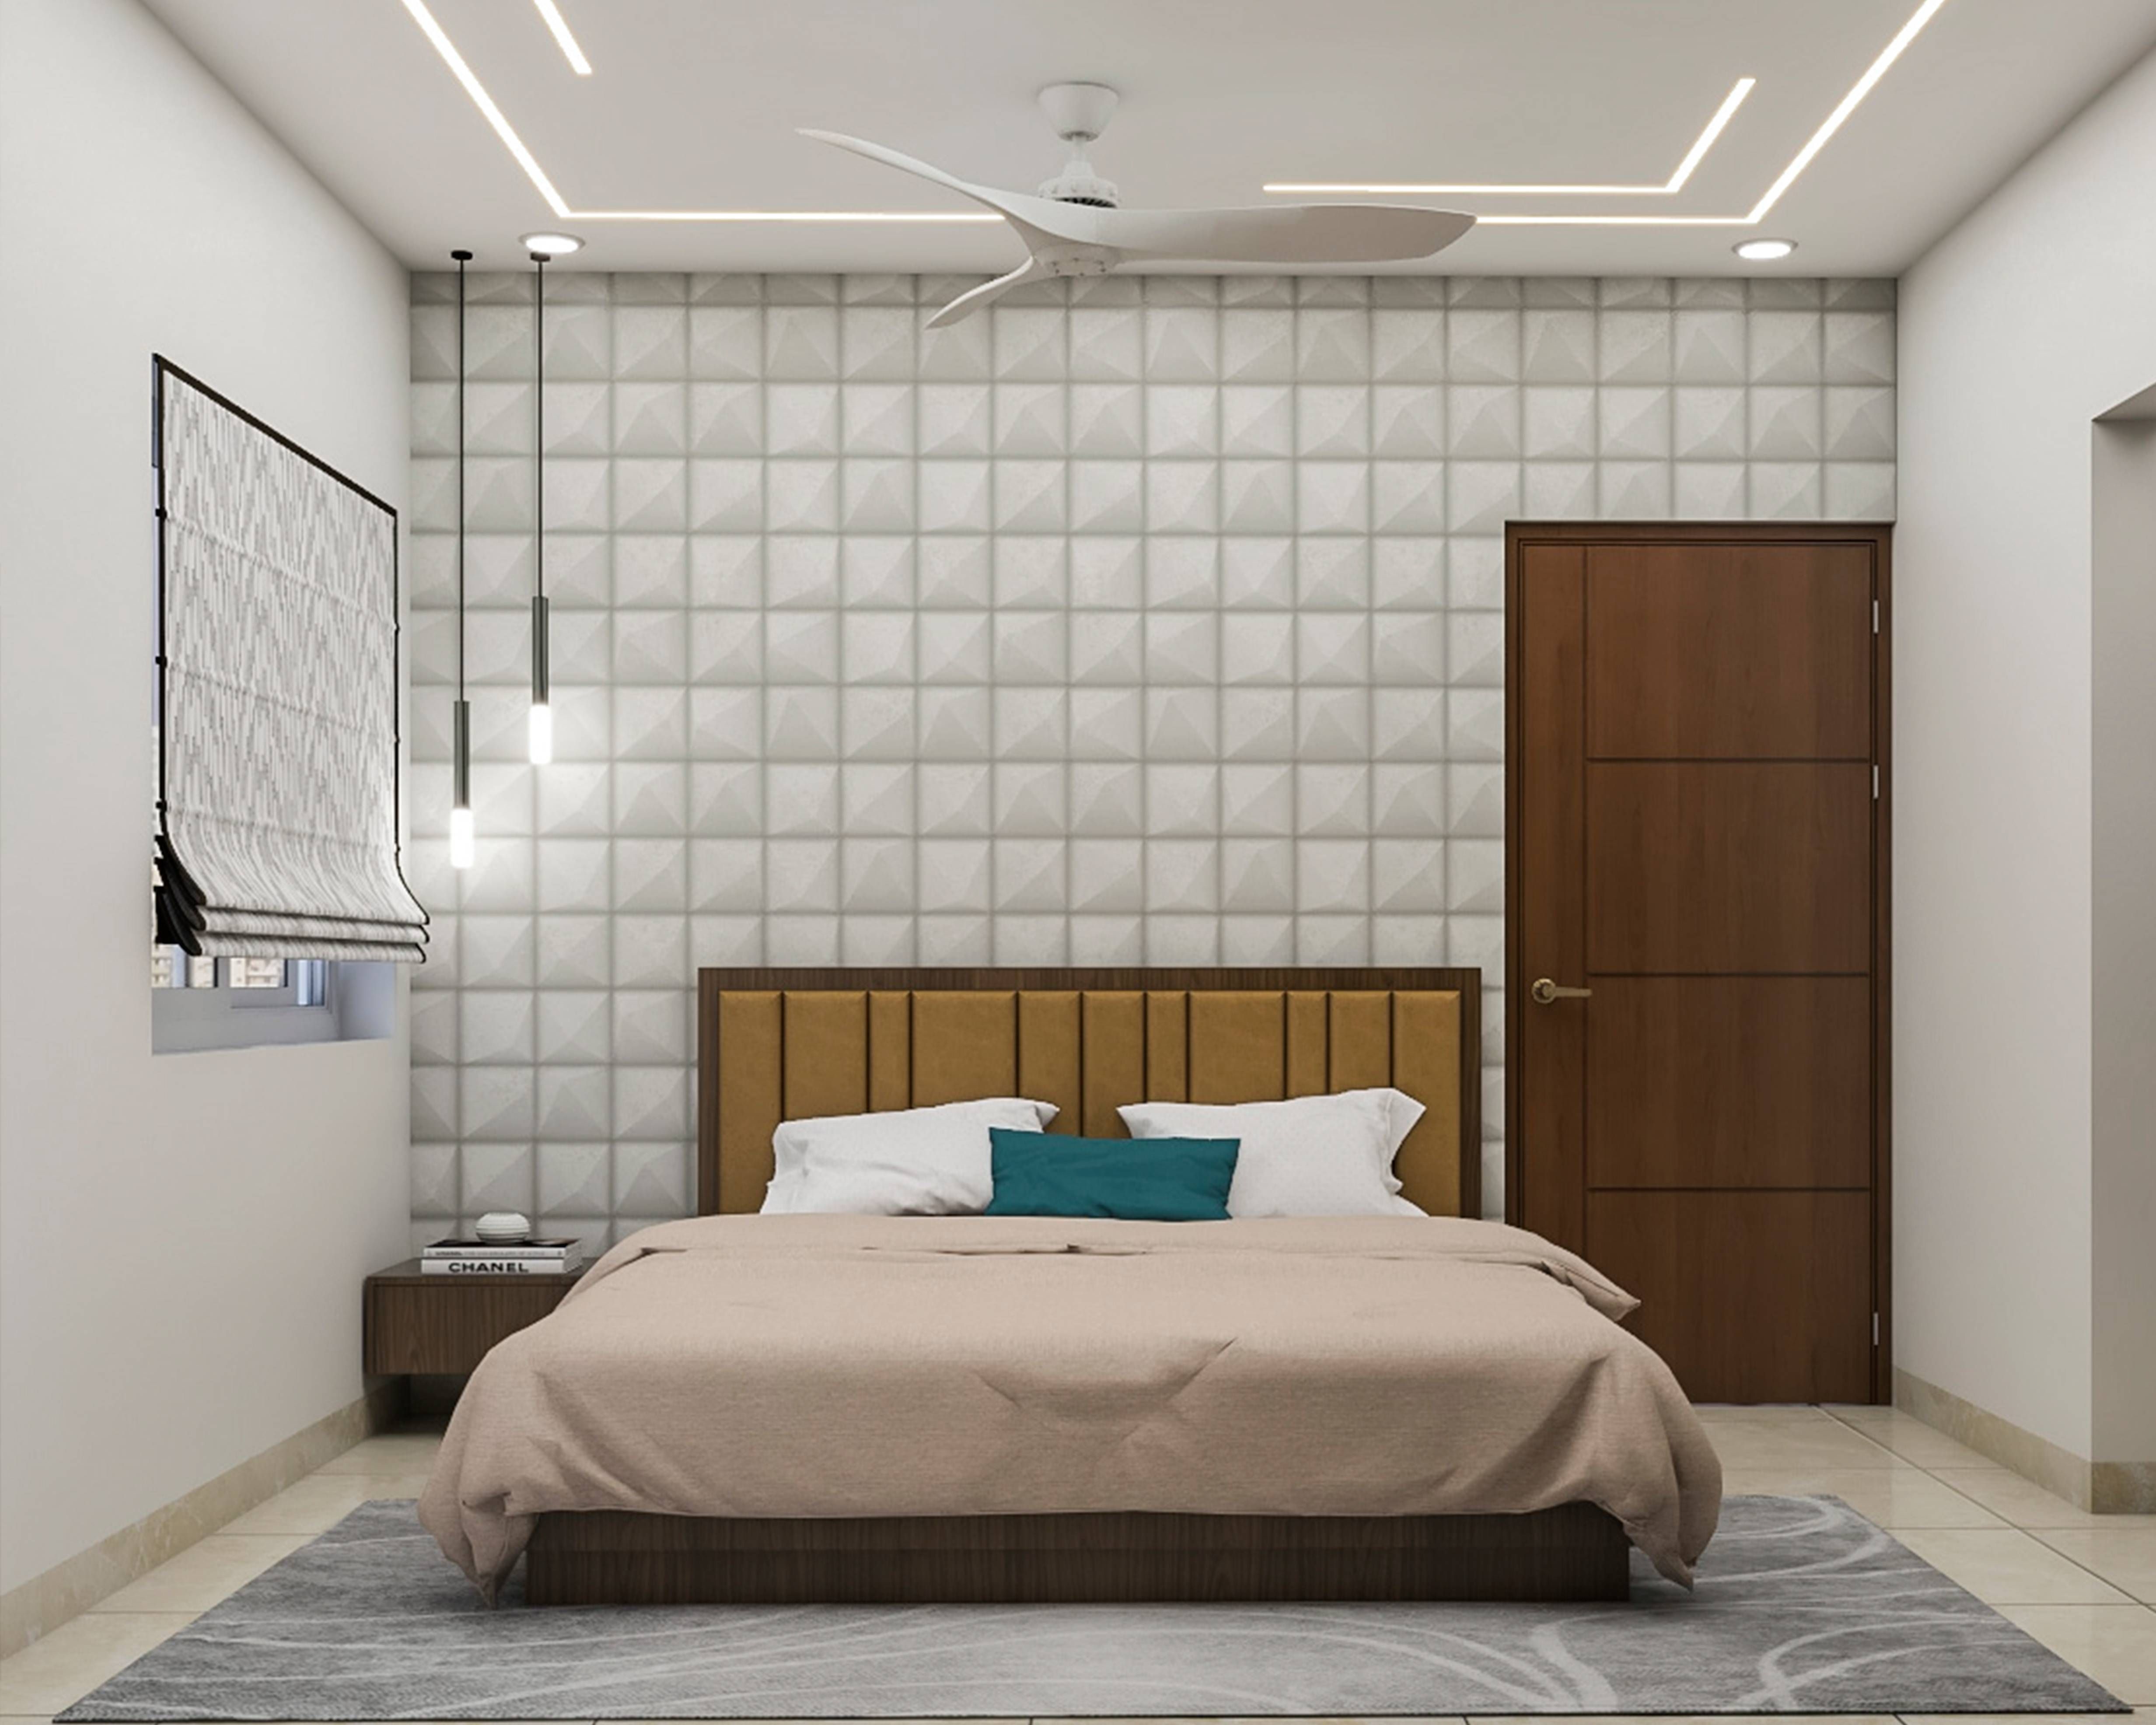 Modern Guest Room Design With A King Size Bed